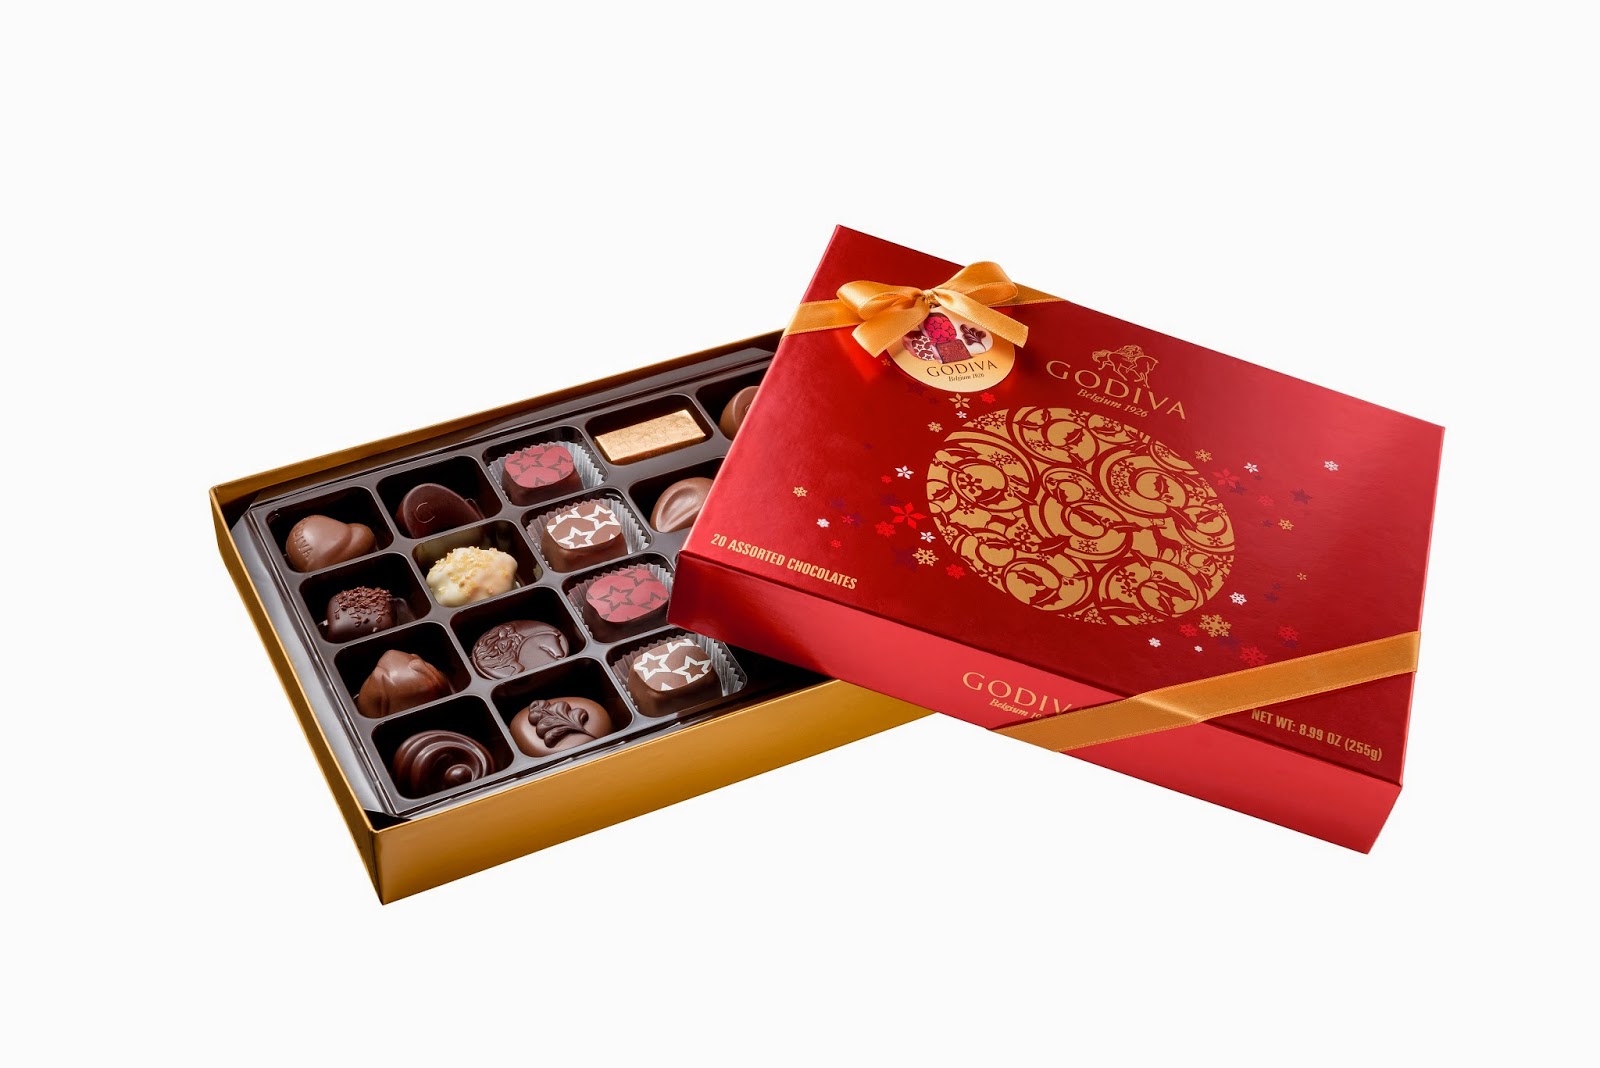 Essential Communications Godiva brings sparkle and